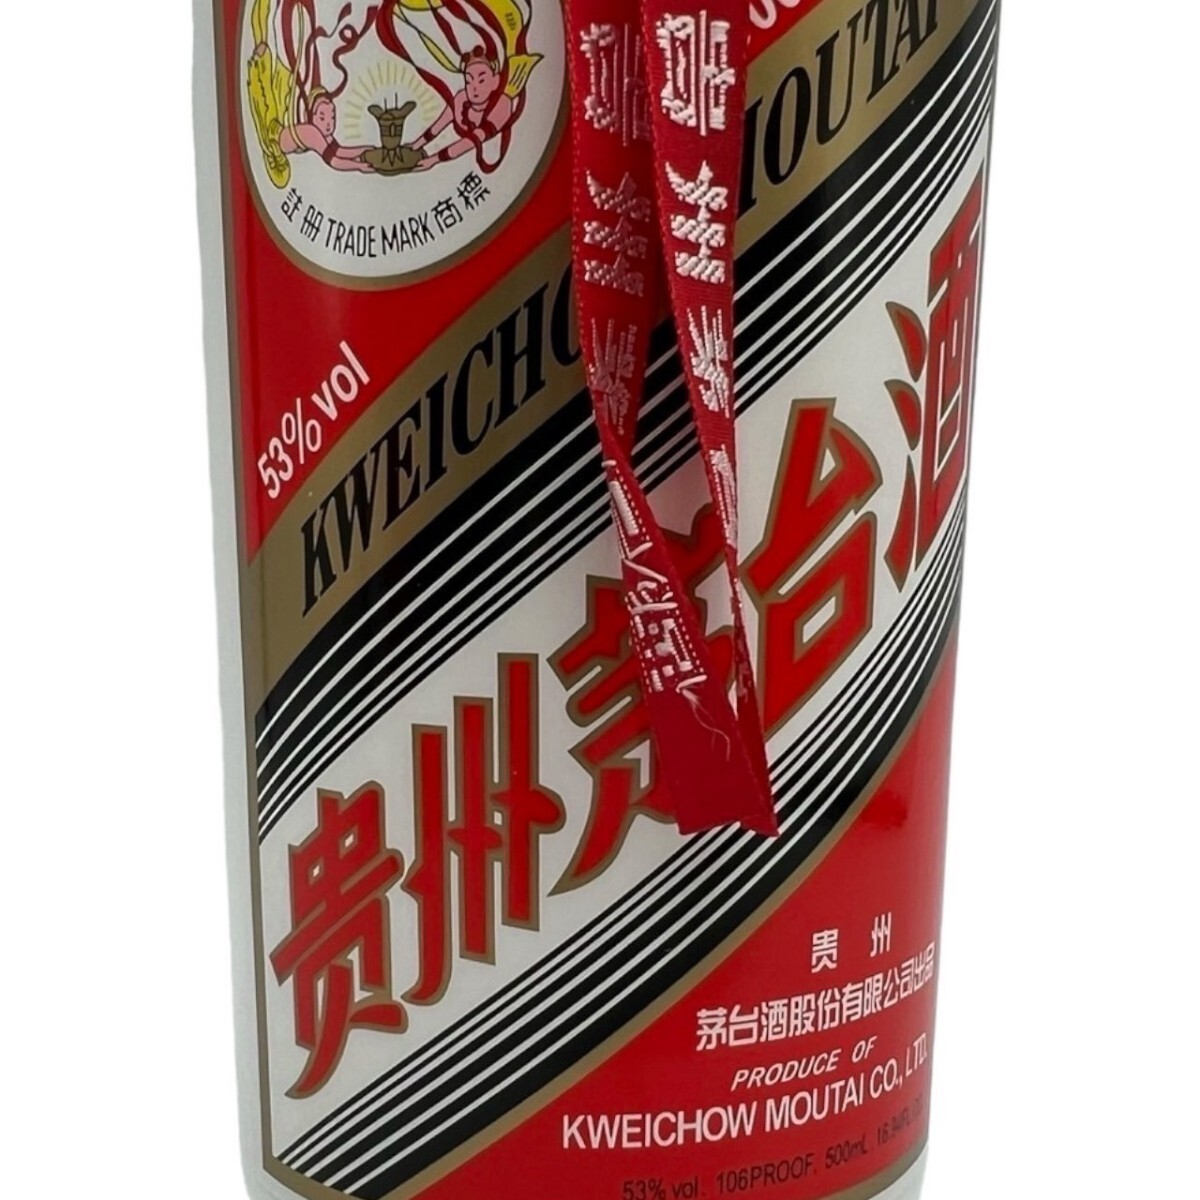 ... pcs sake mao Thai sake heaven woman label 2021 MOUTAI KWEICHOW China sake 500ml 53% box booklet glass attaching 952g4-15-81 including in a package un- possible N